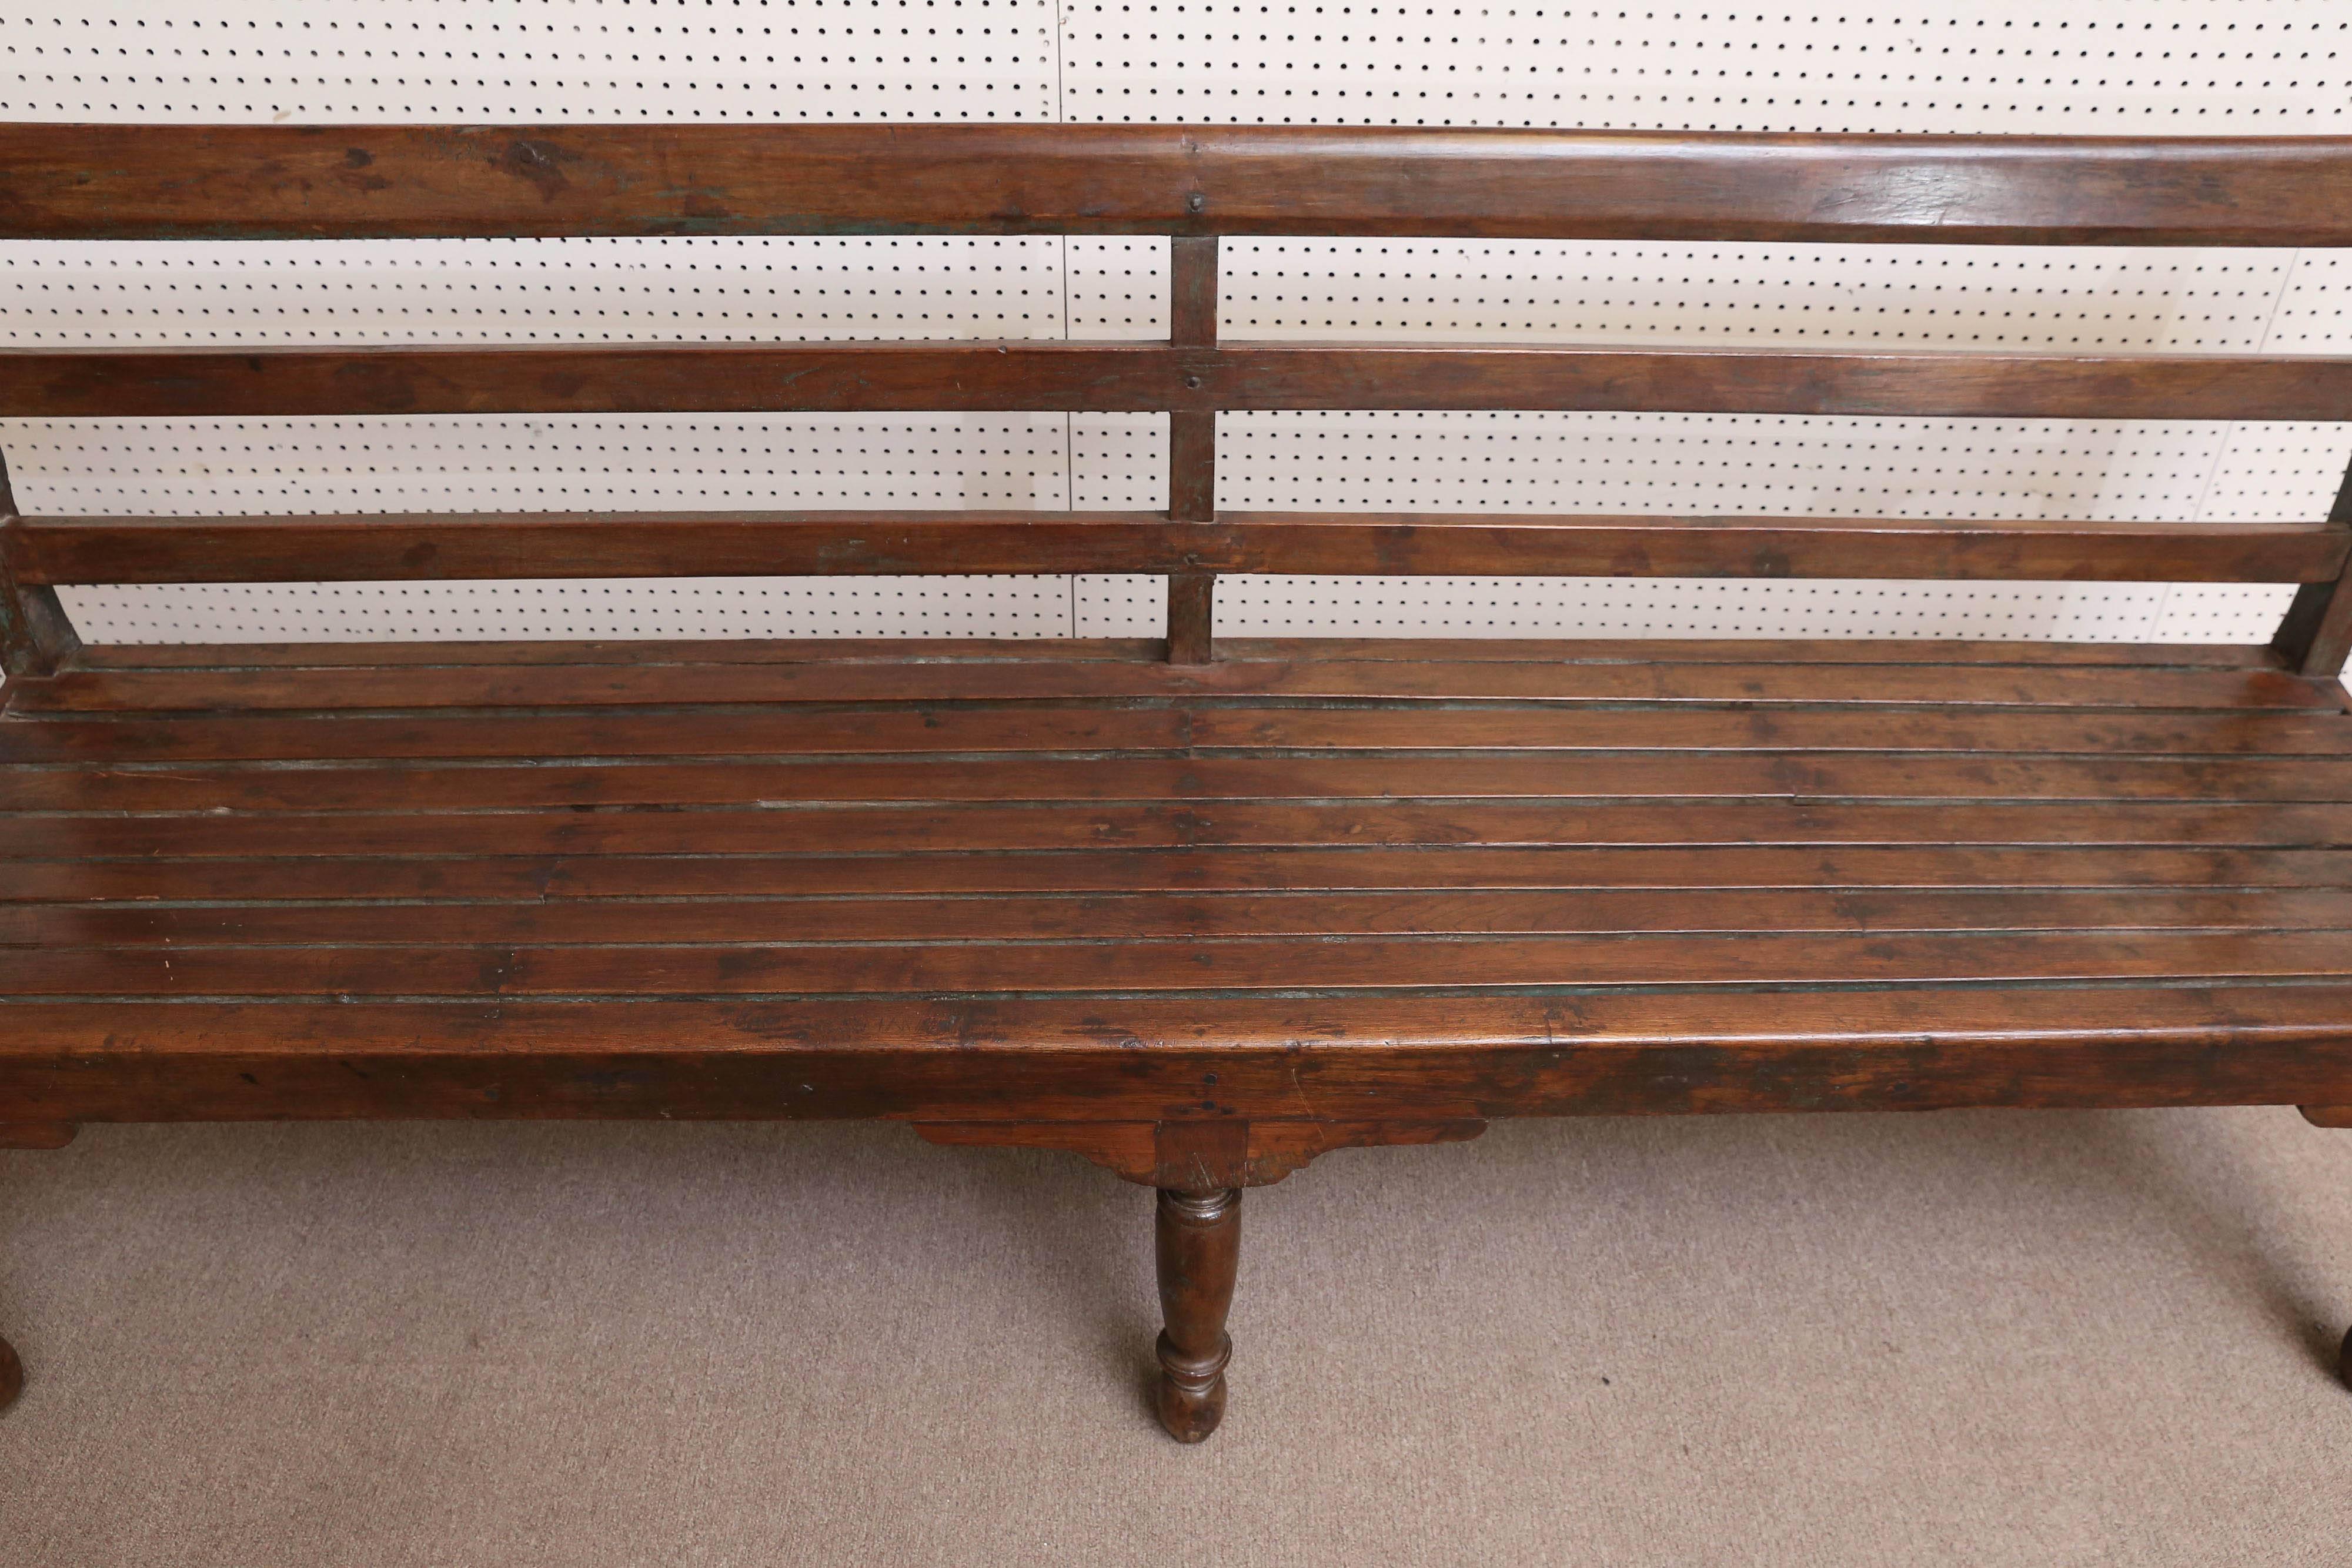 Indian Solid Teak Wood Mid-19th Century British Colonial Work Bench